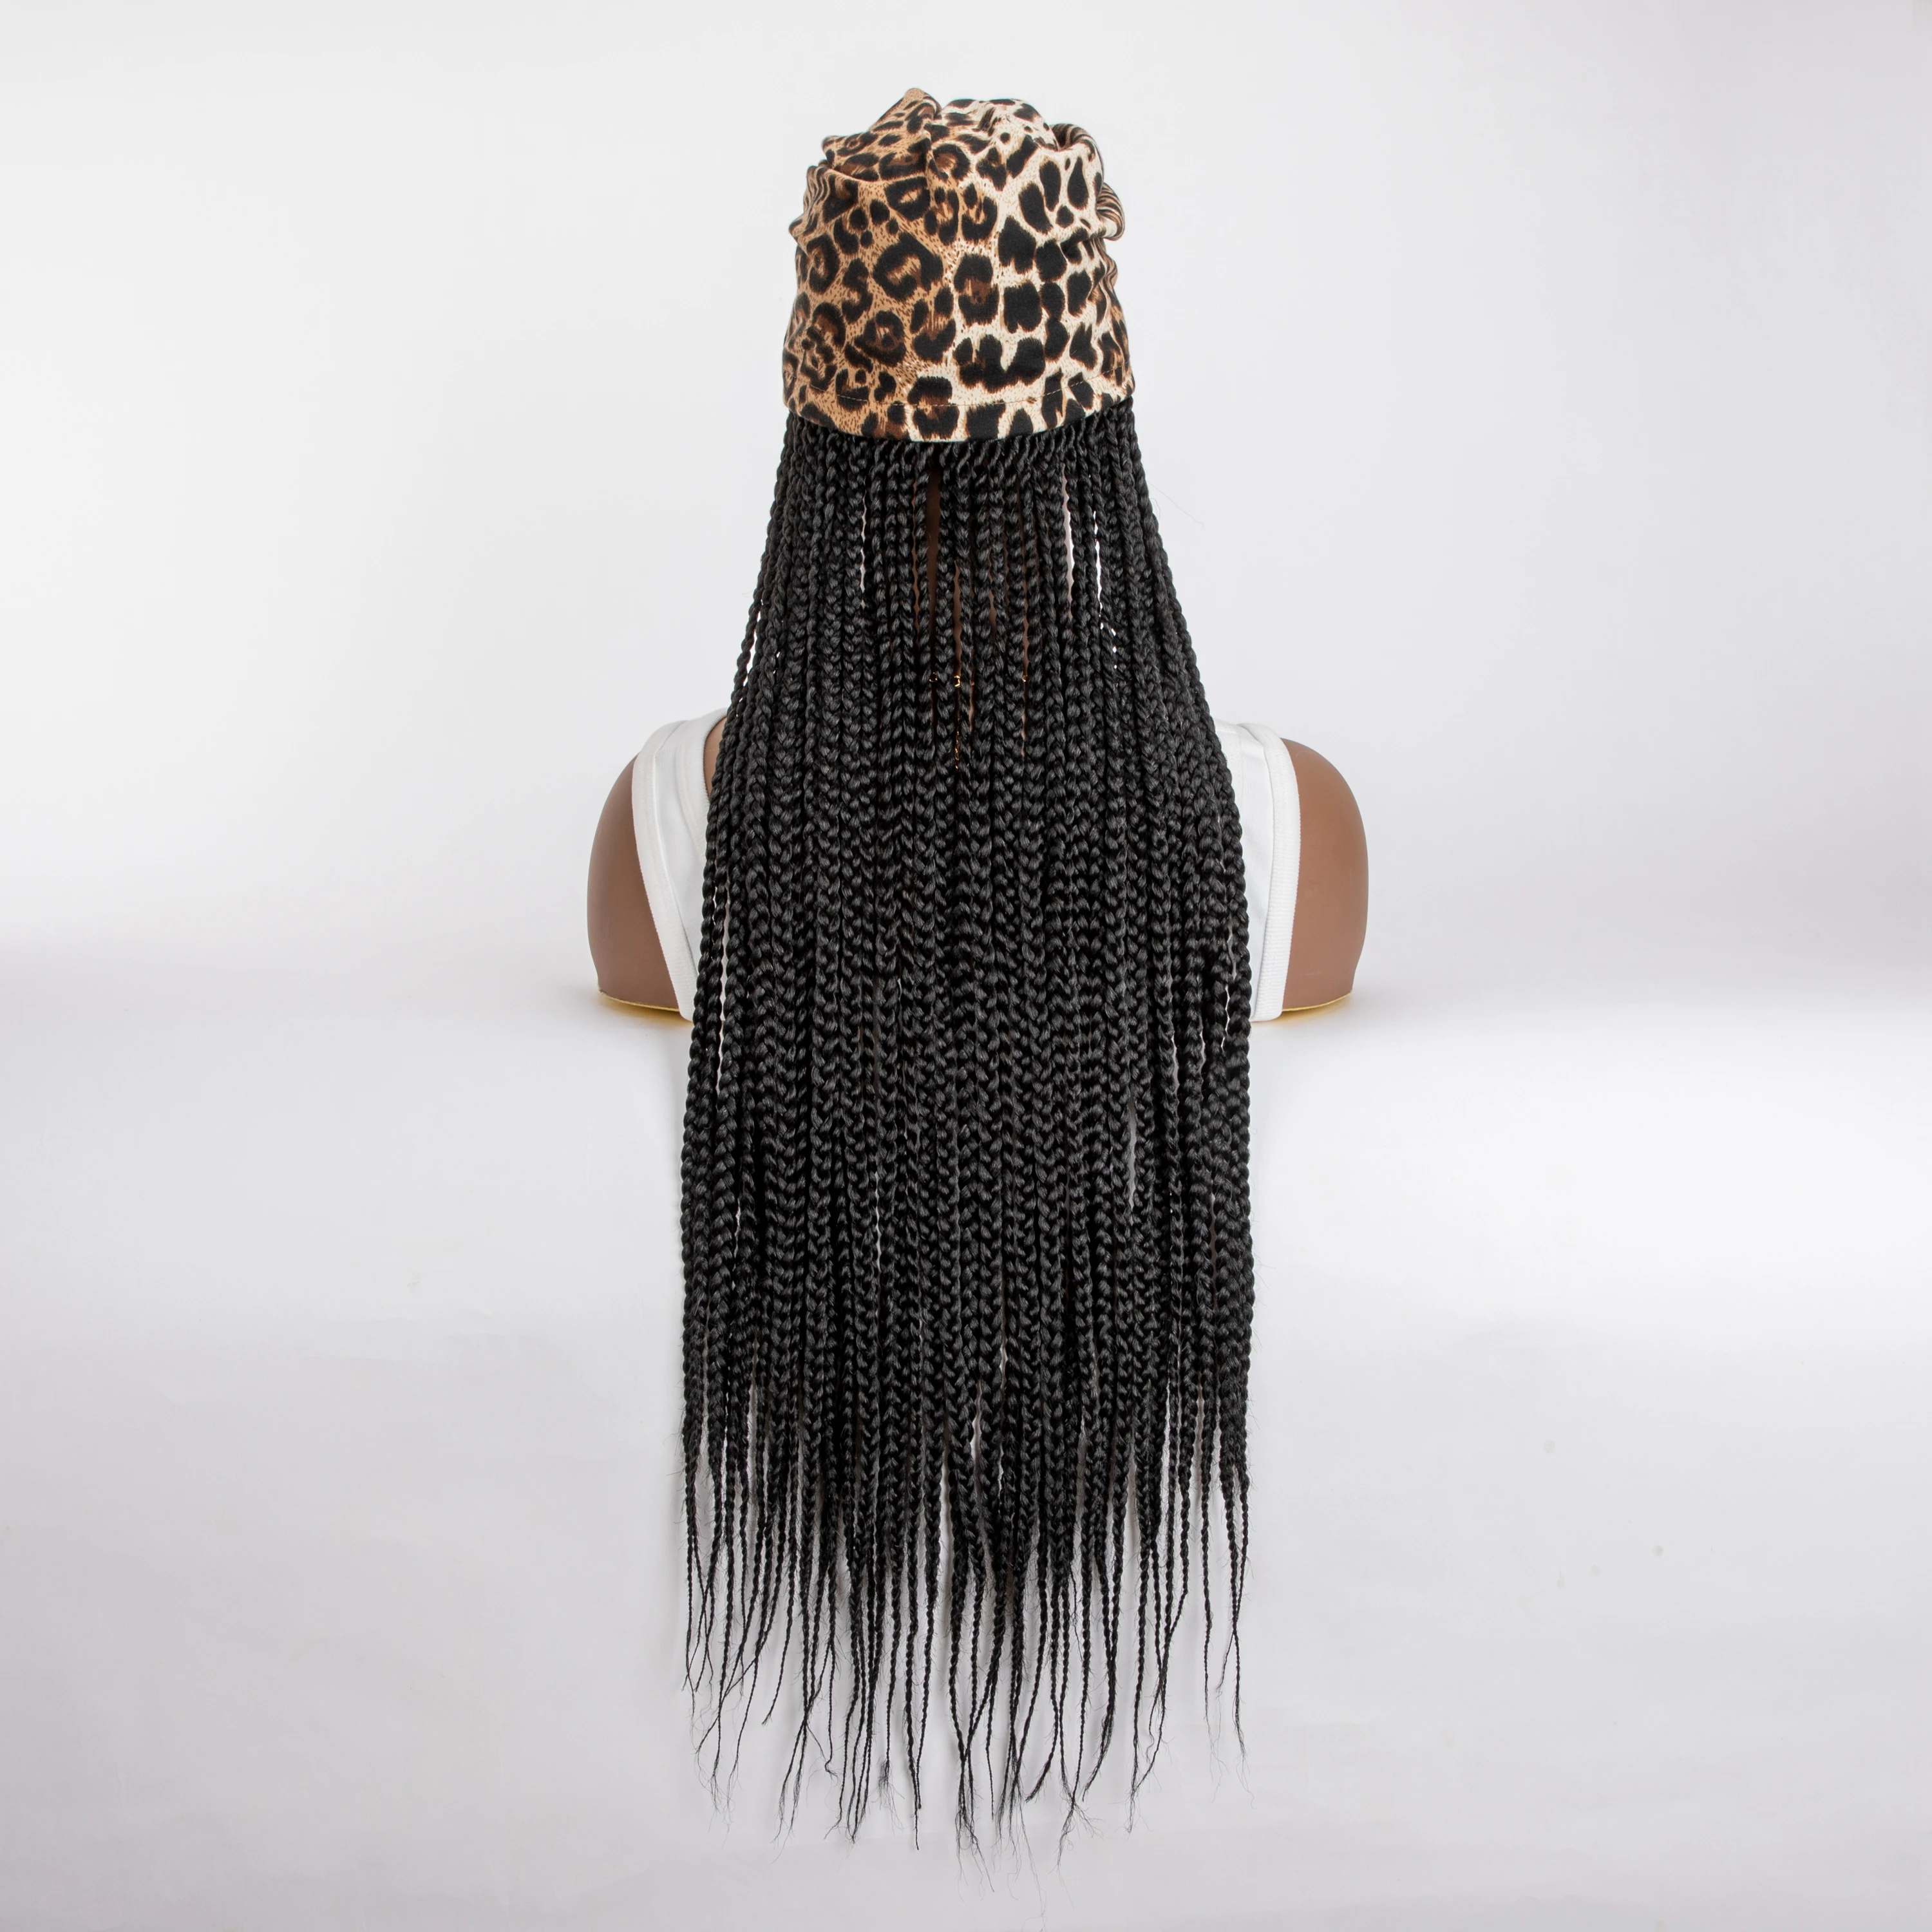 WIGERA Leopard Print Headband Long Braided Synthetic Wig With Turban Hat Box Braiding Hair Extensions Head Scarf  Easy Hairstyle